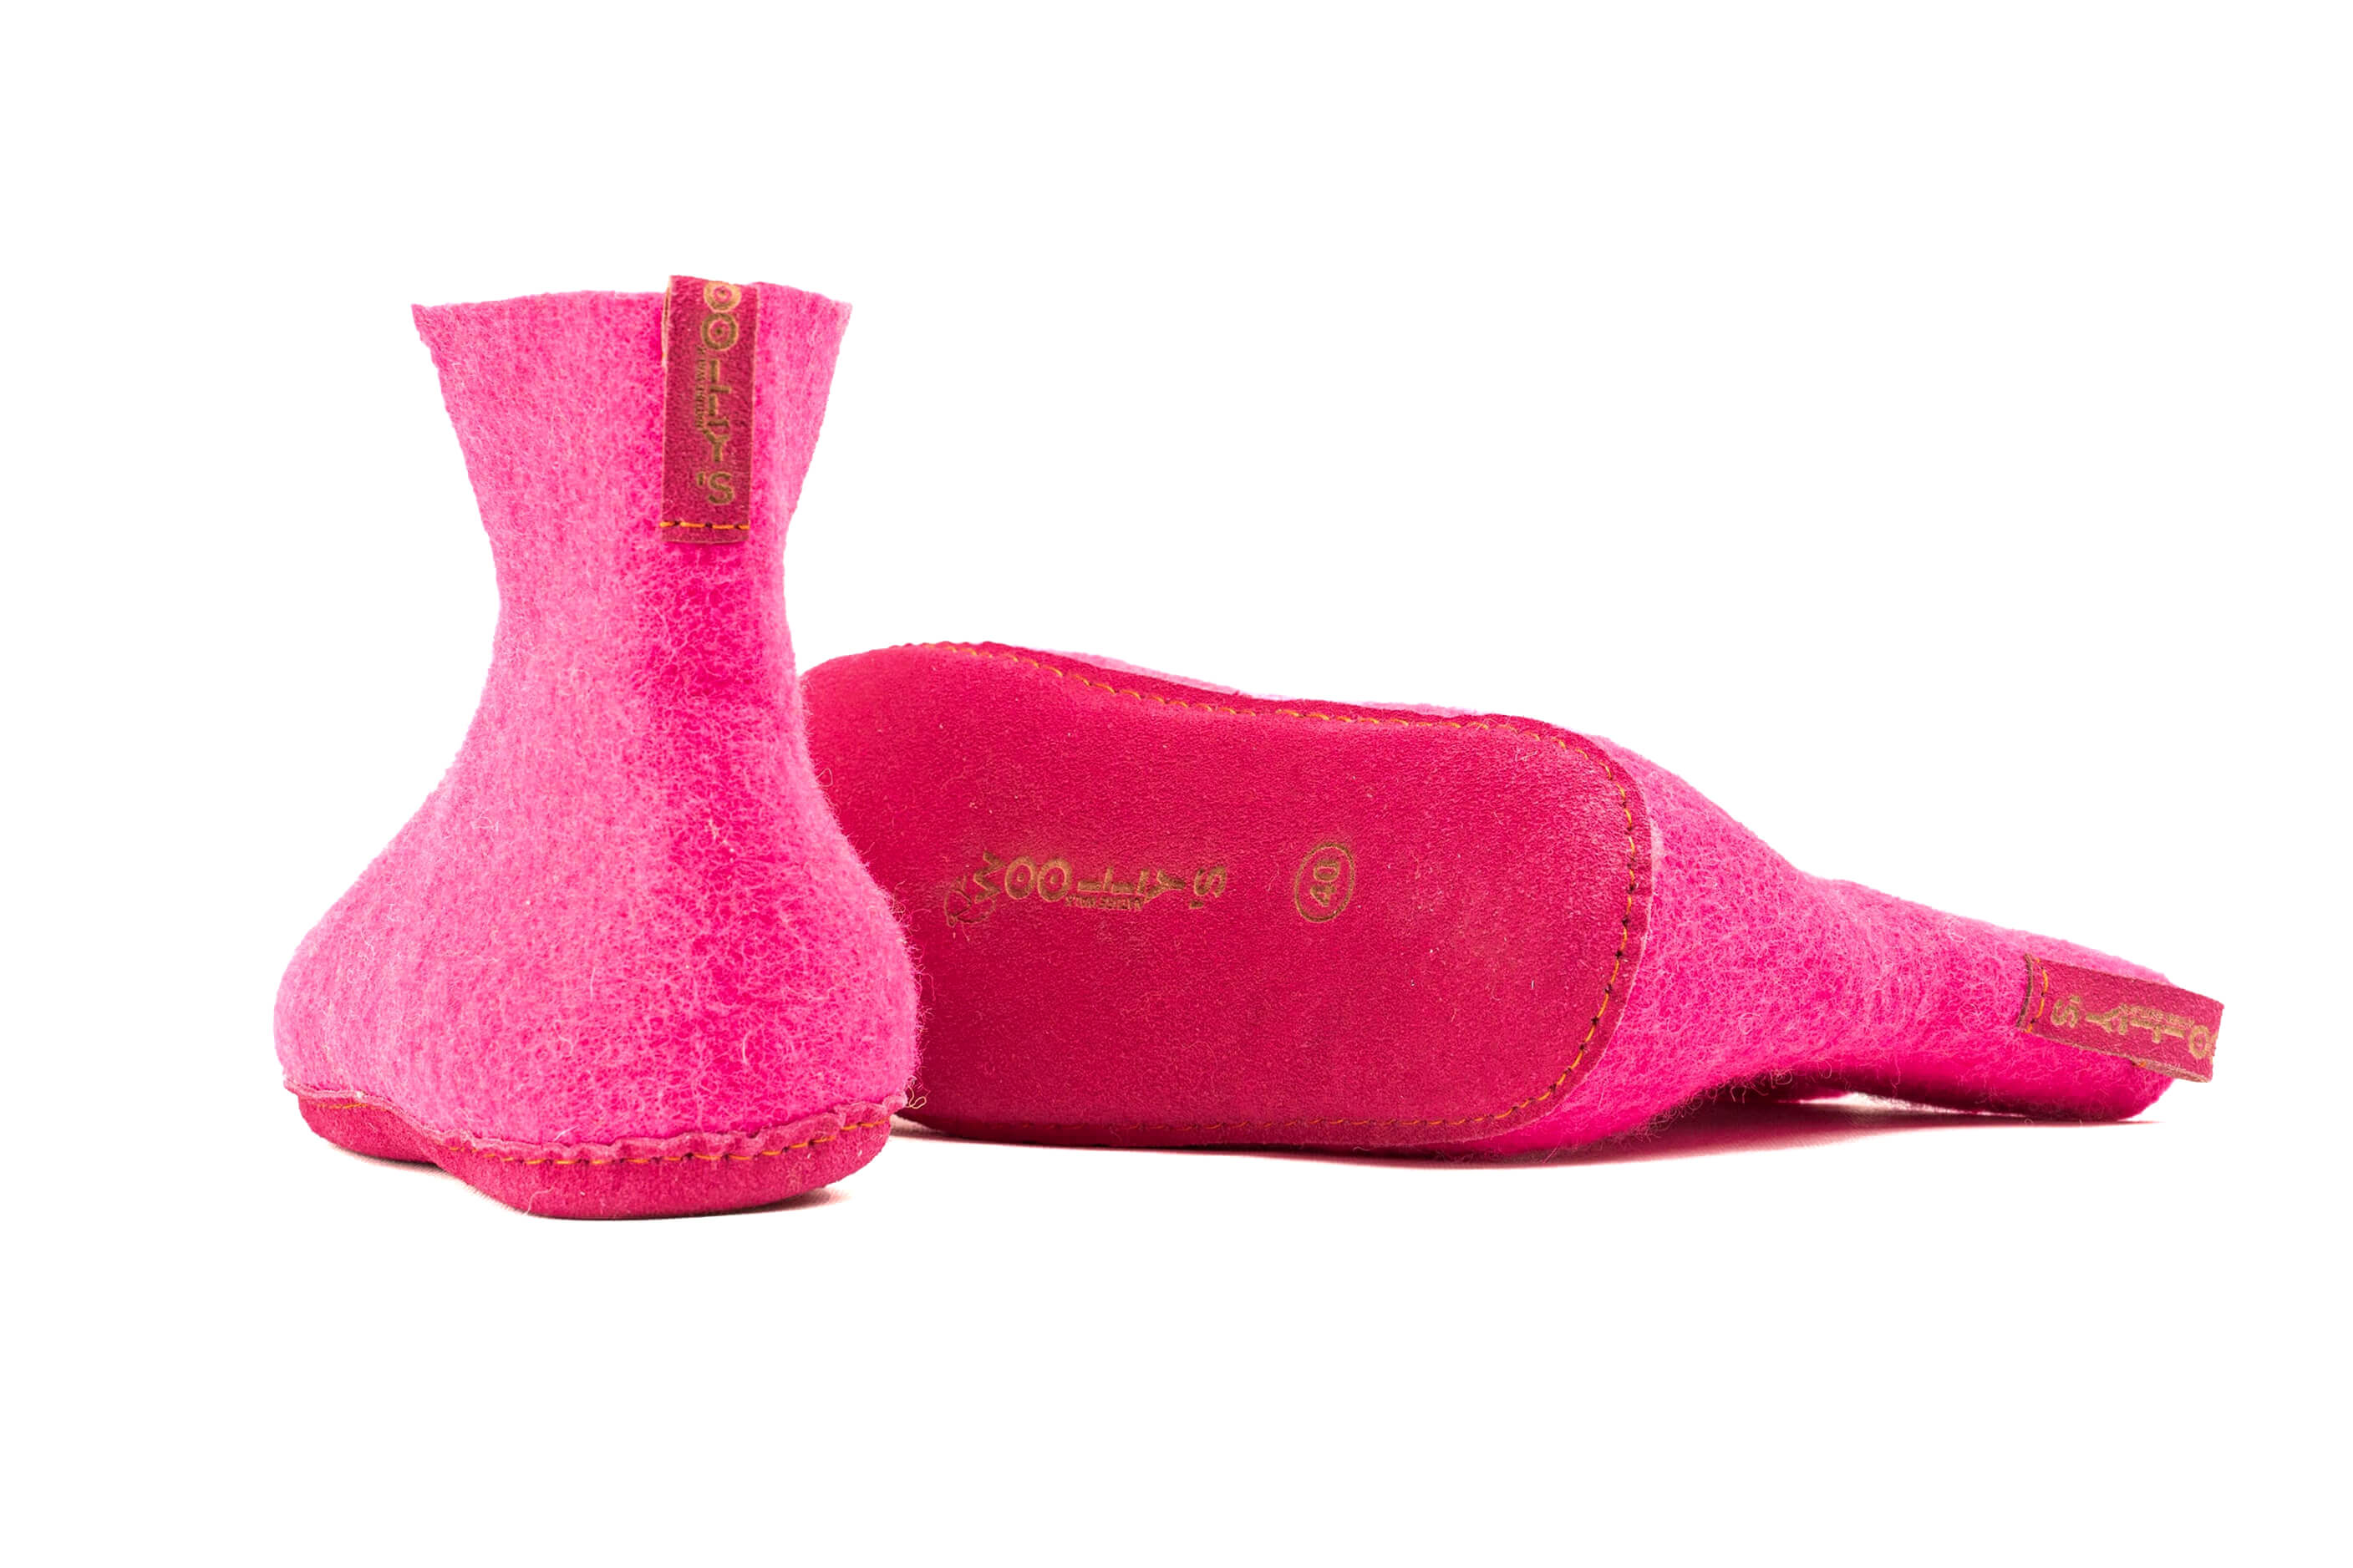 Indoor Boots With Leather Sole - Fuchsia